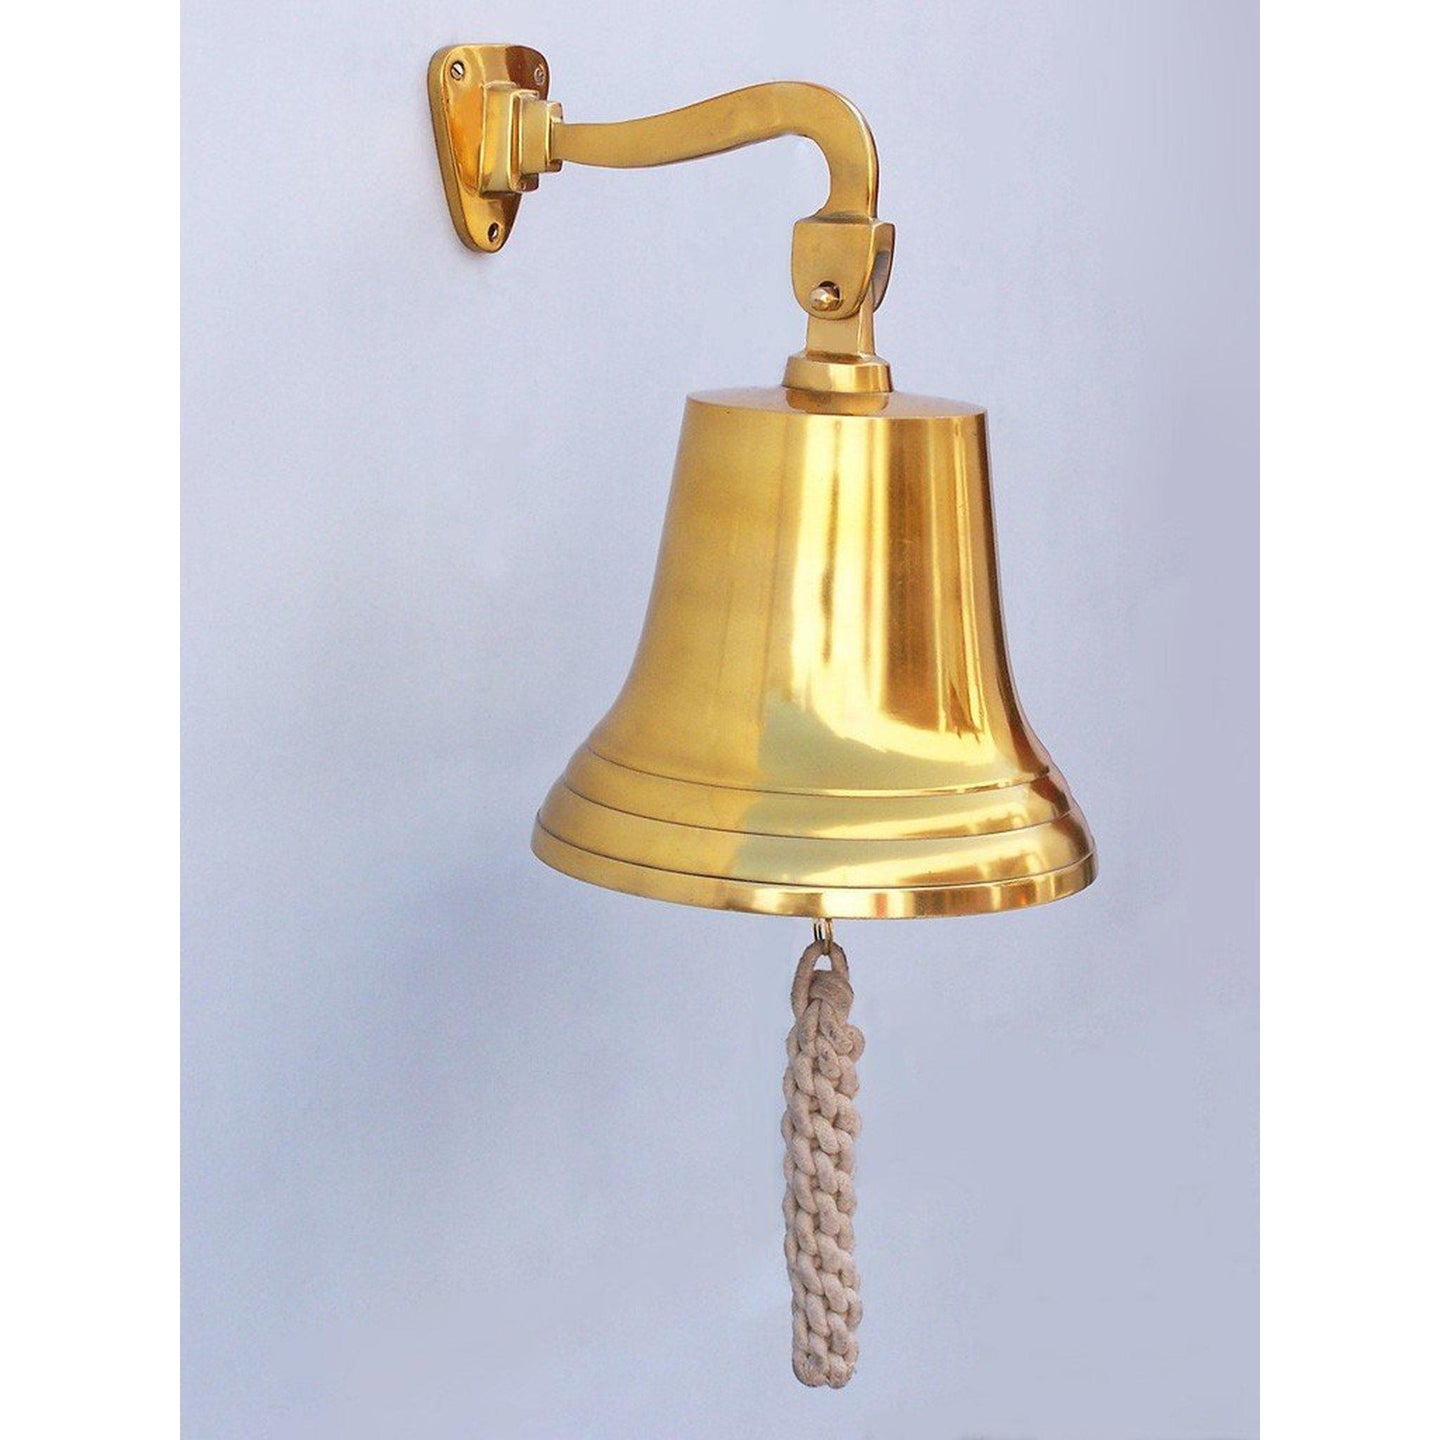 Handcrafted Model Ships Brass Plated Hanging Ship's Bell 11